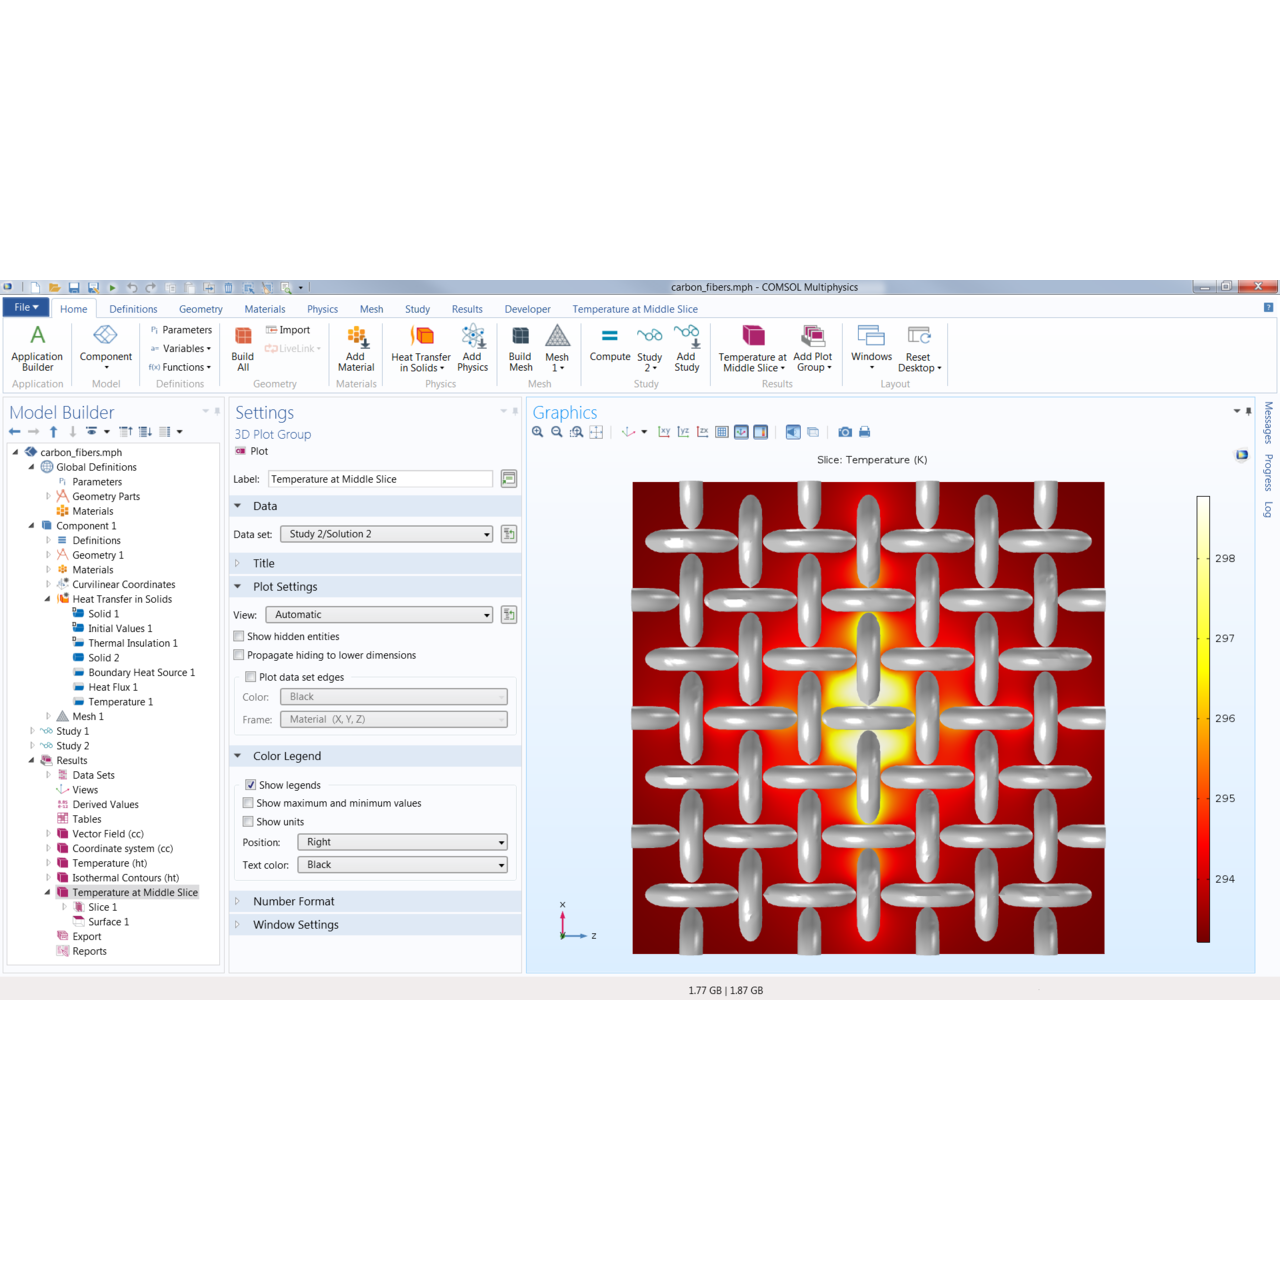 free download comsol multiphysics 5.2 standalone